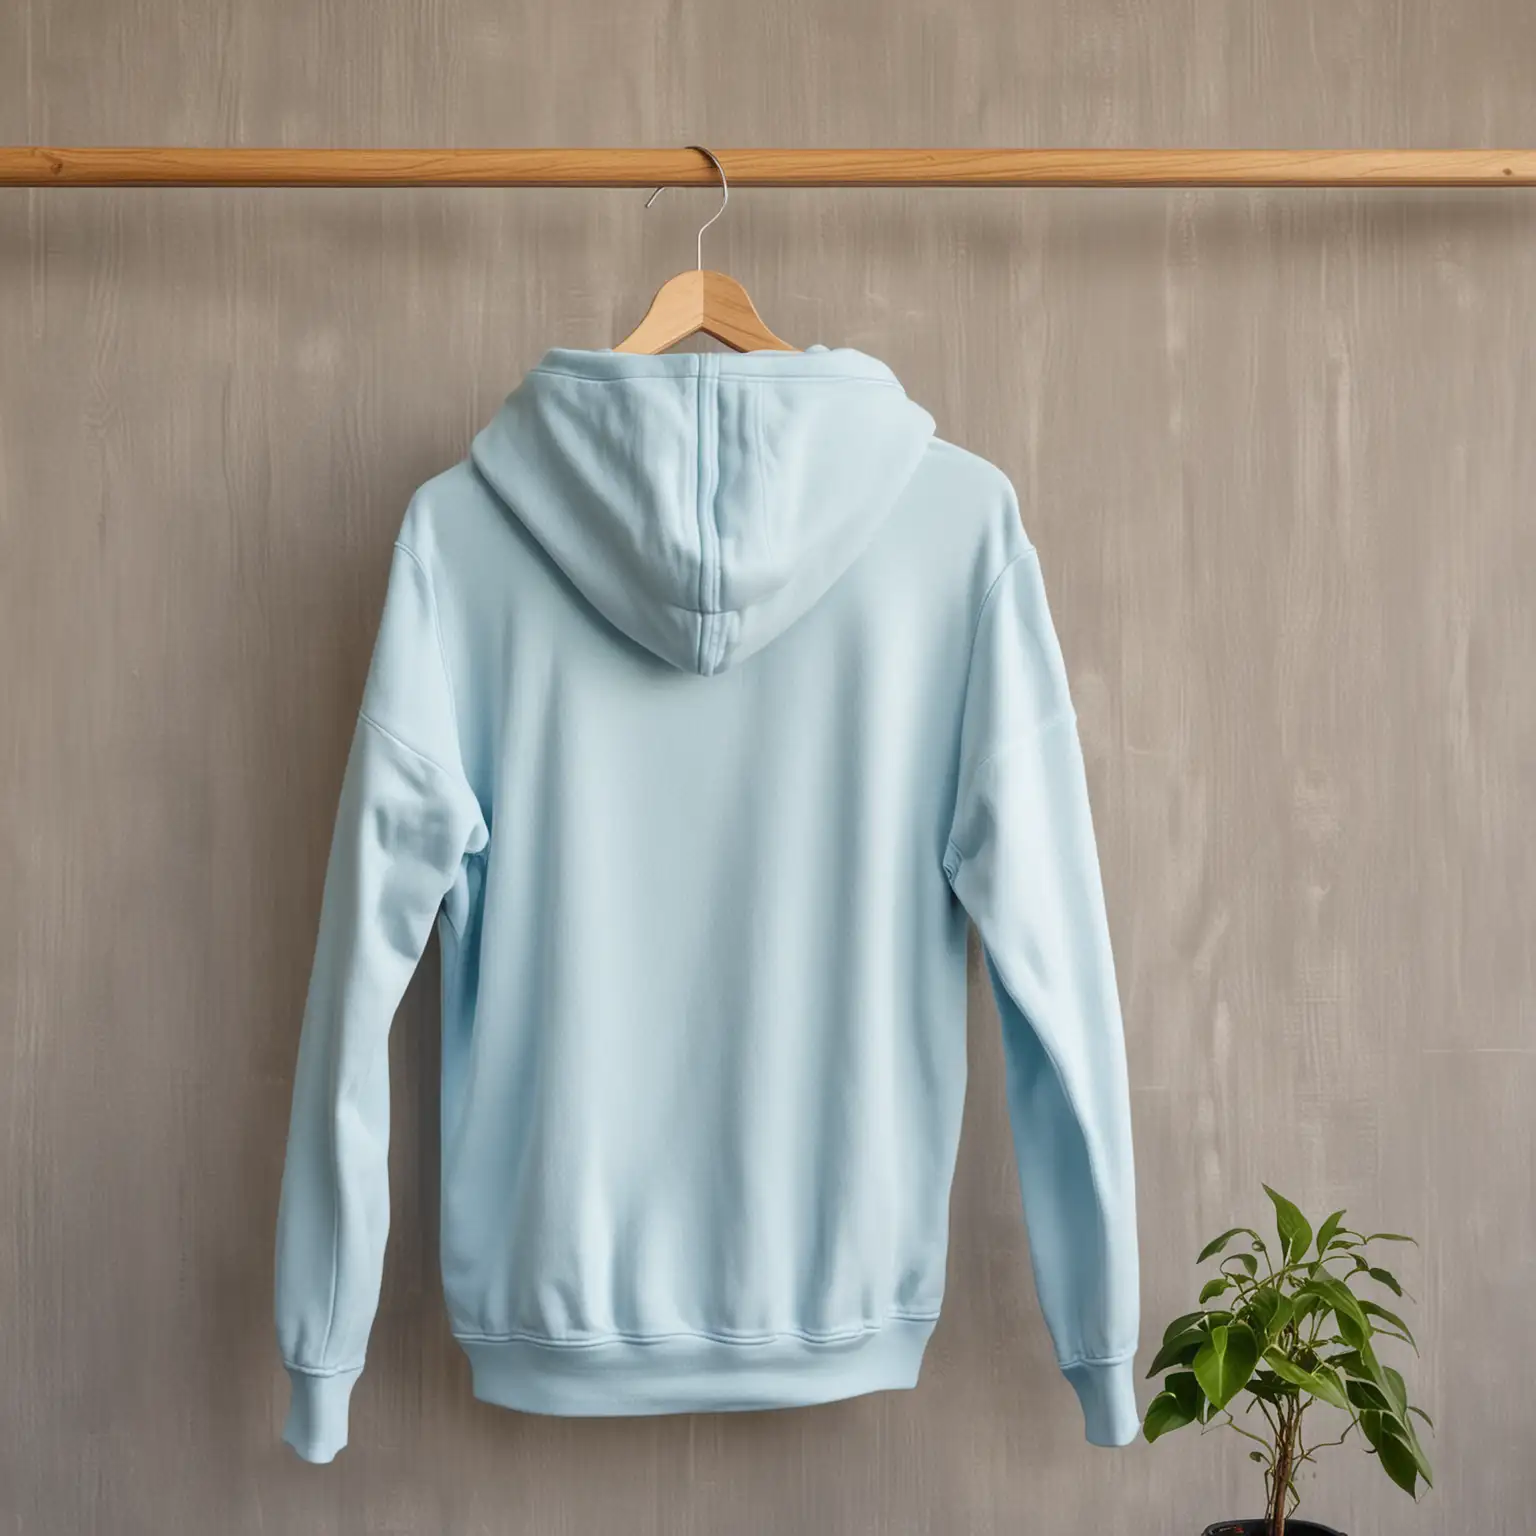 Light Blue Hoodie Hanging on Wooden Pole with Plant Background